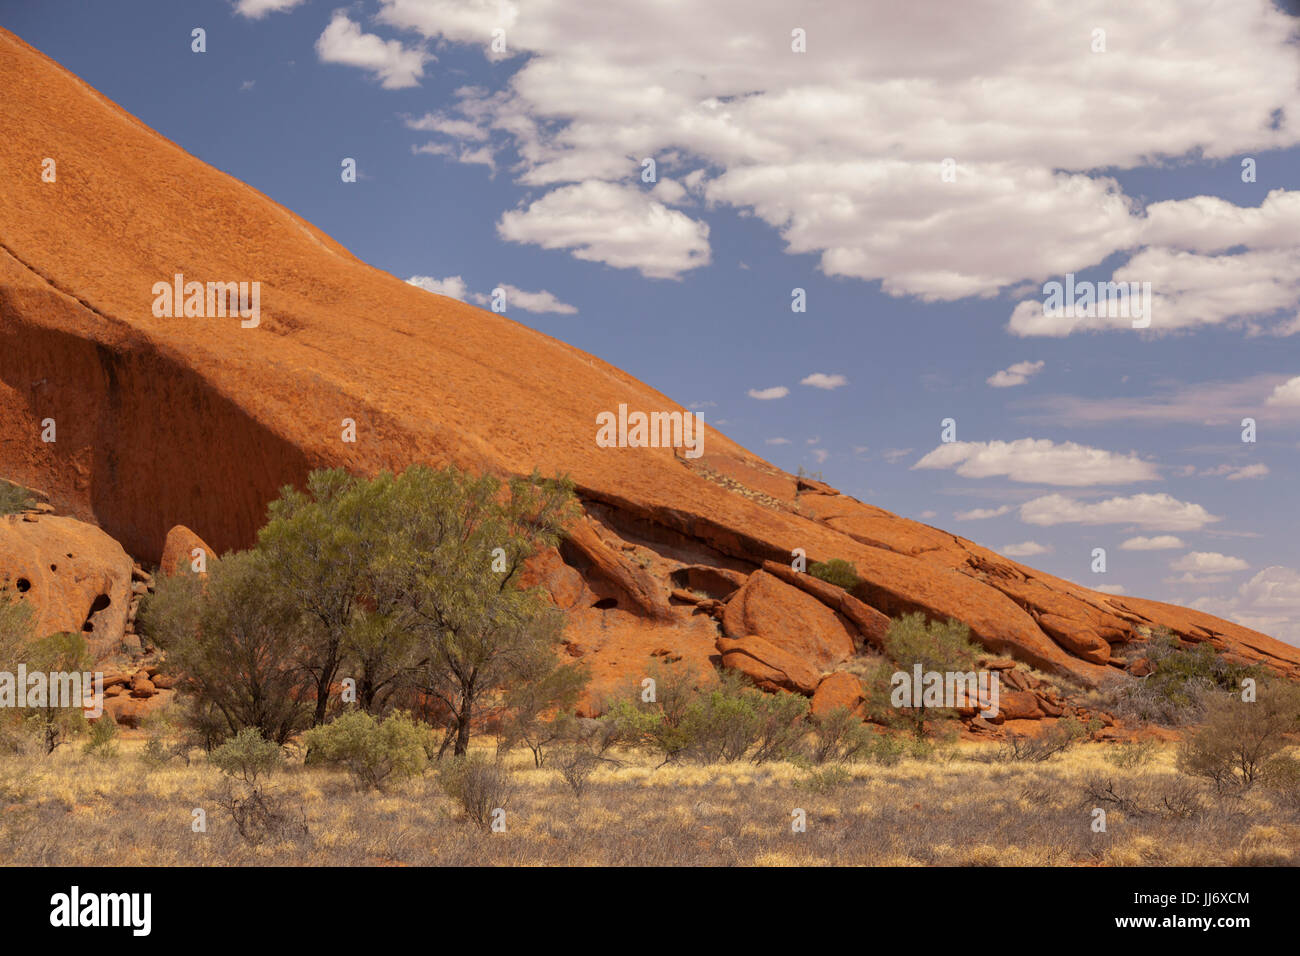 Uluru, (Ayers Rock), close up views of the different areas around Uluru, rock gardens, water holes, paths, rock caves, water fall trails, vegetation i Stock Photo